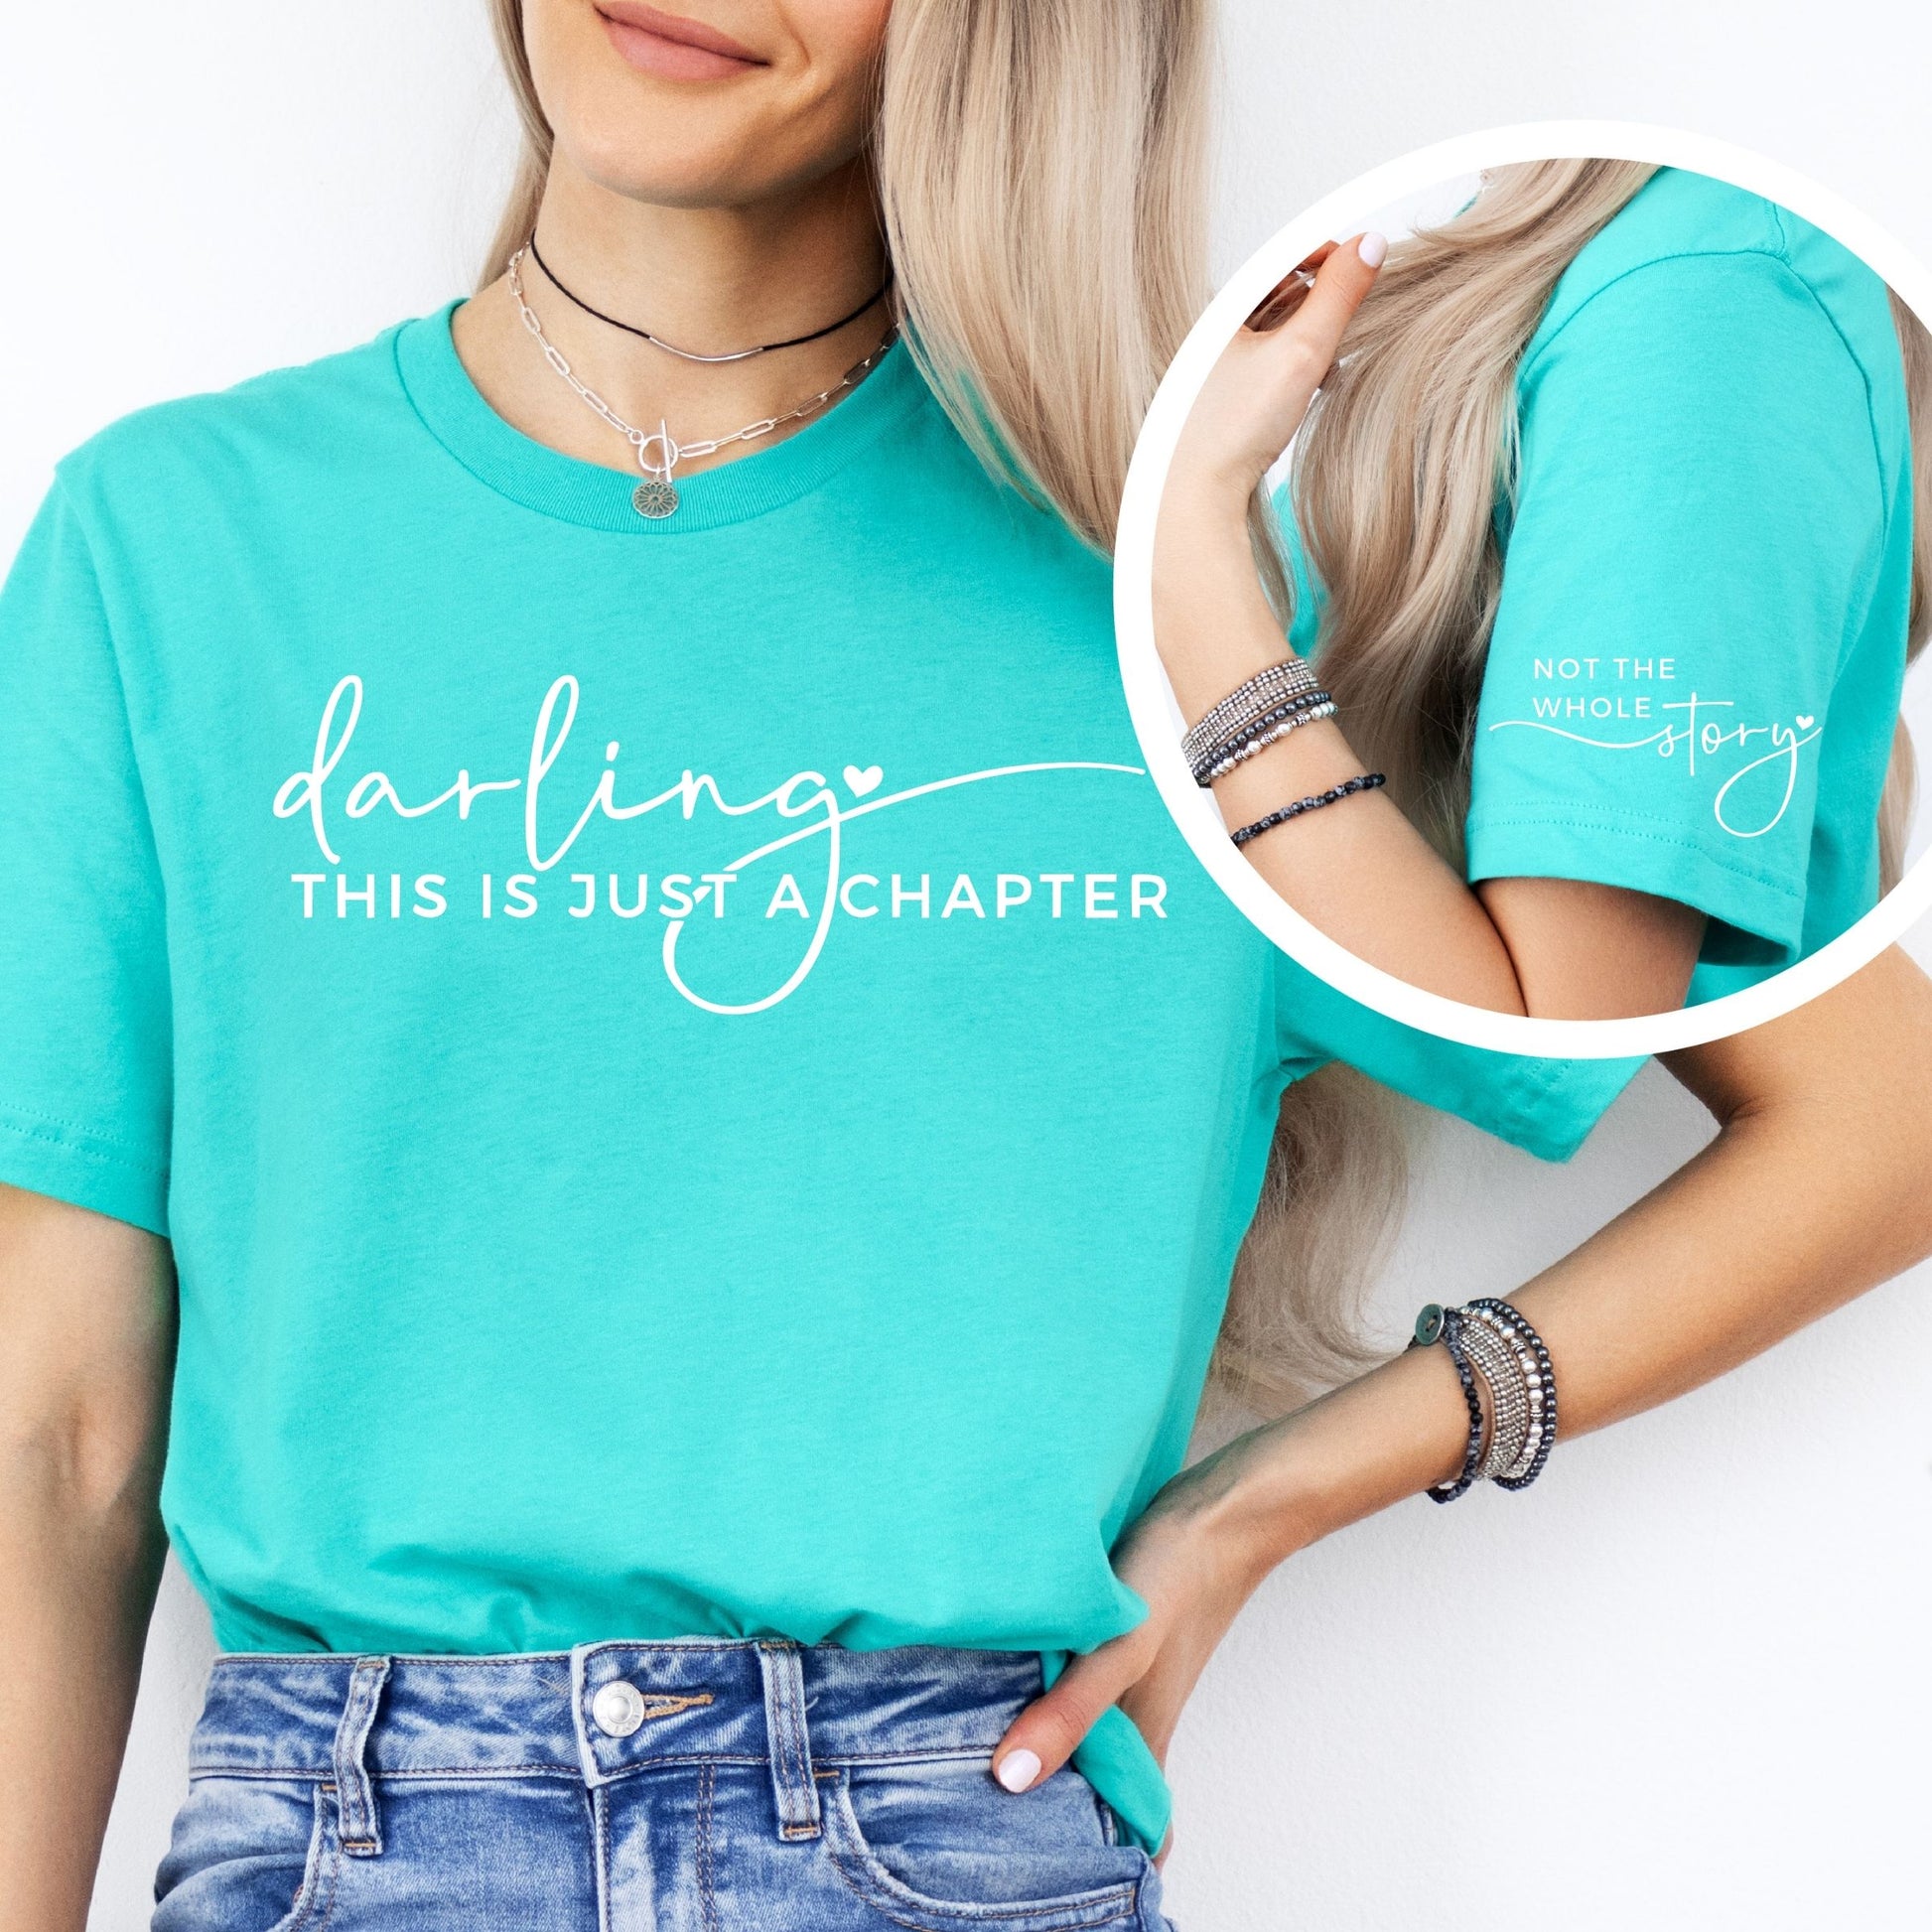 Darling This Is Just A Chapter T-Shirt - Mardonyx T-Shirt XS / Teal